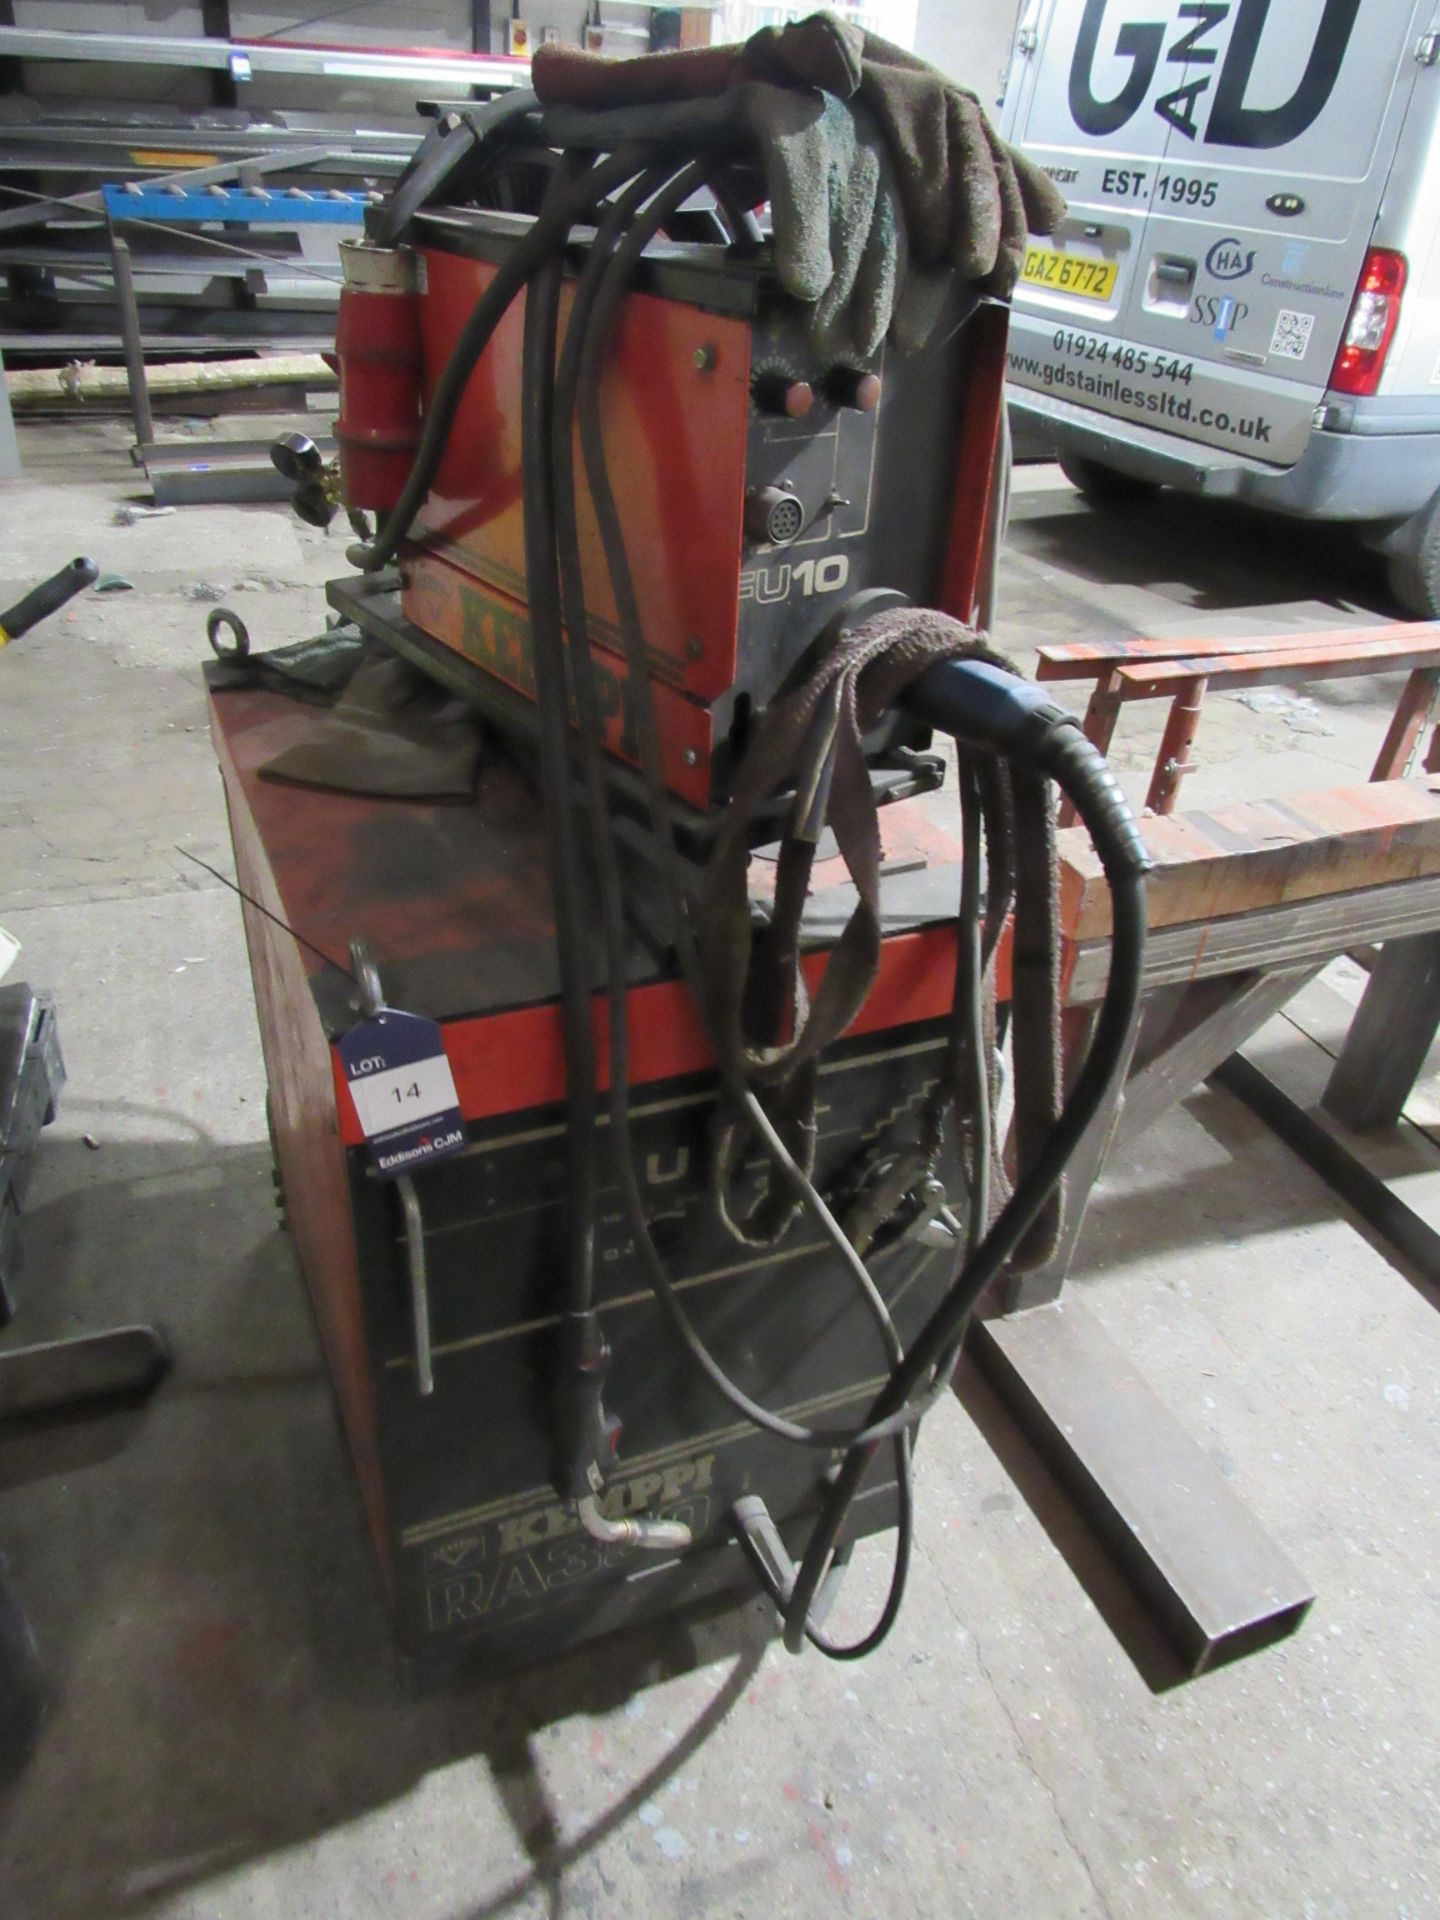 Kemppi RA350 Mig Welding Set with FU10 Wire Feed - Image 2 of 2